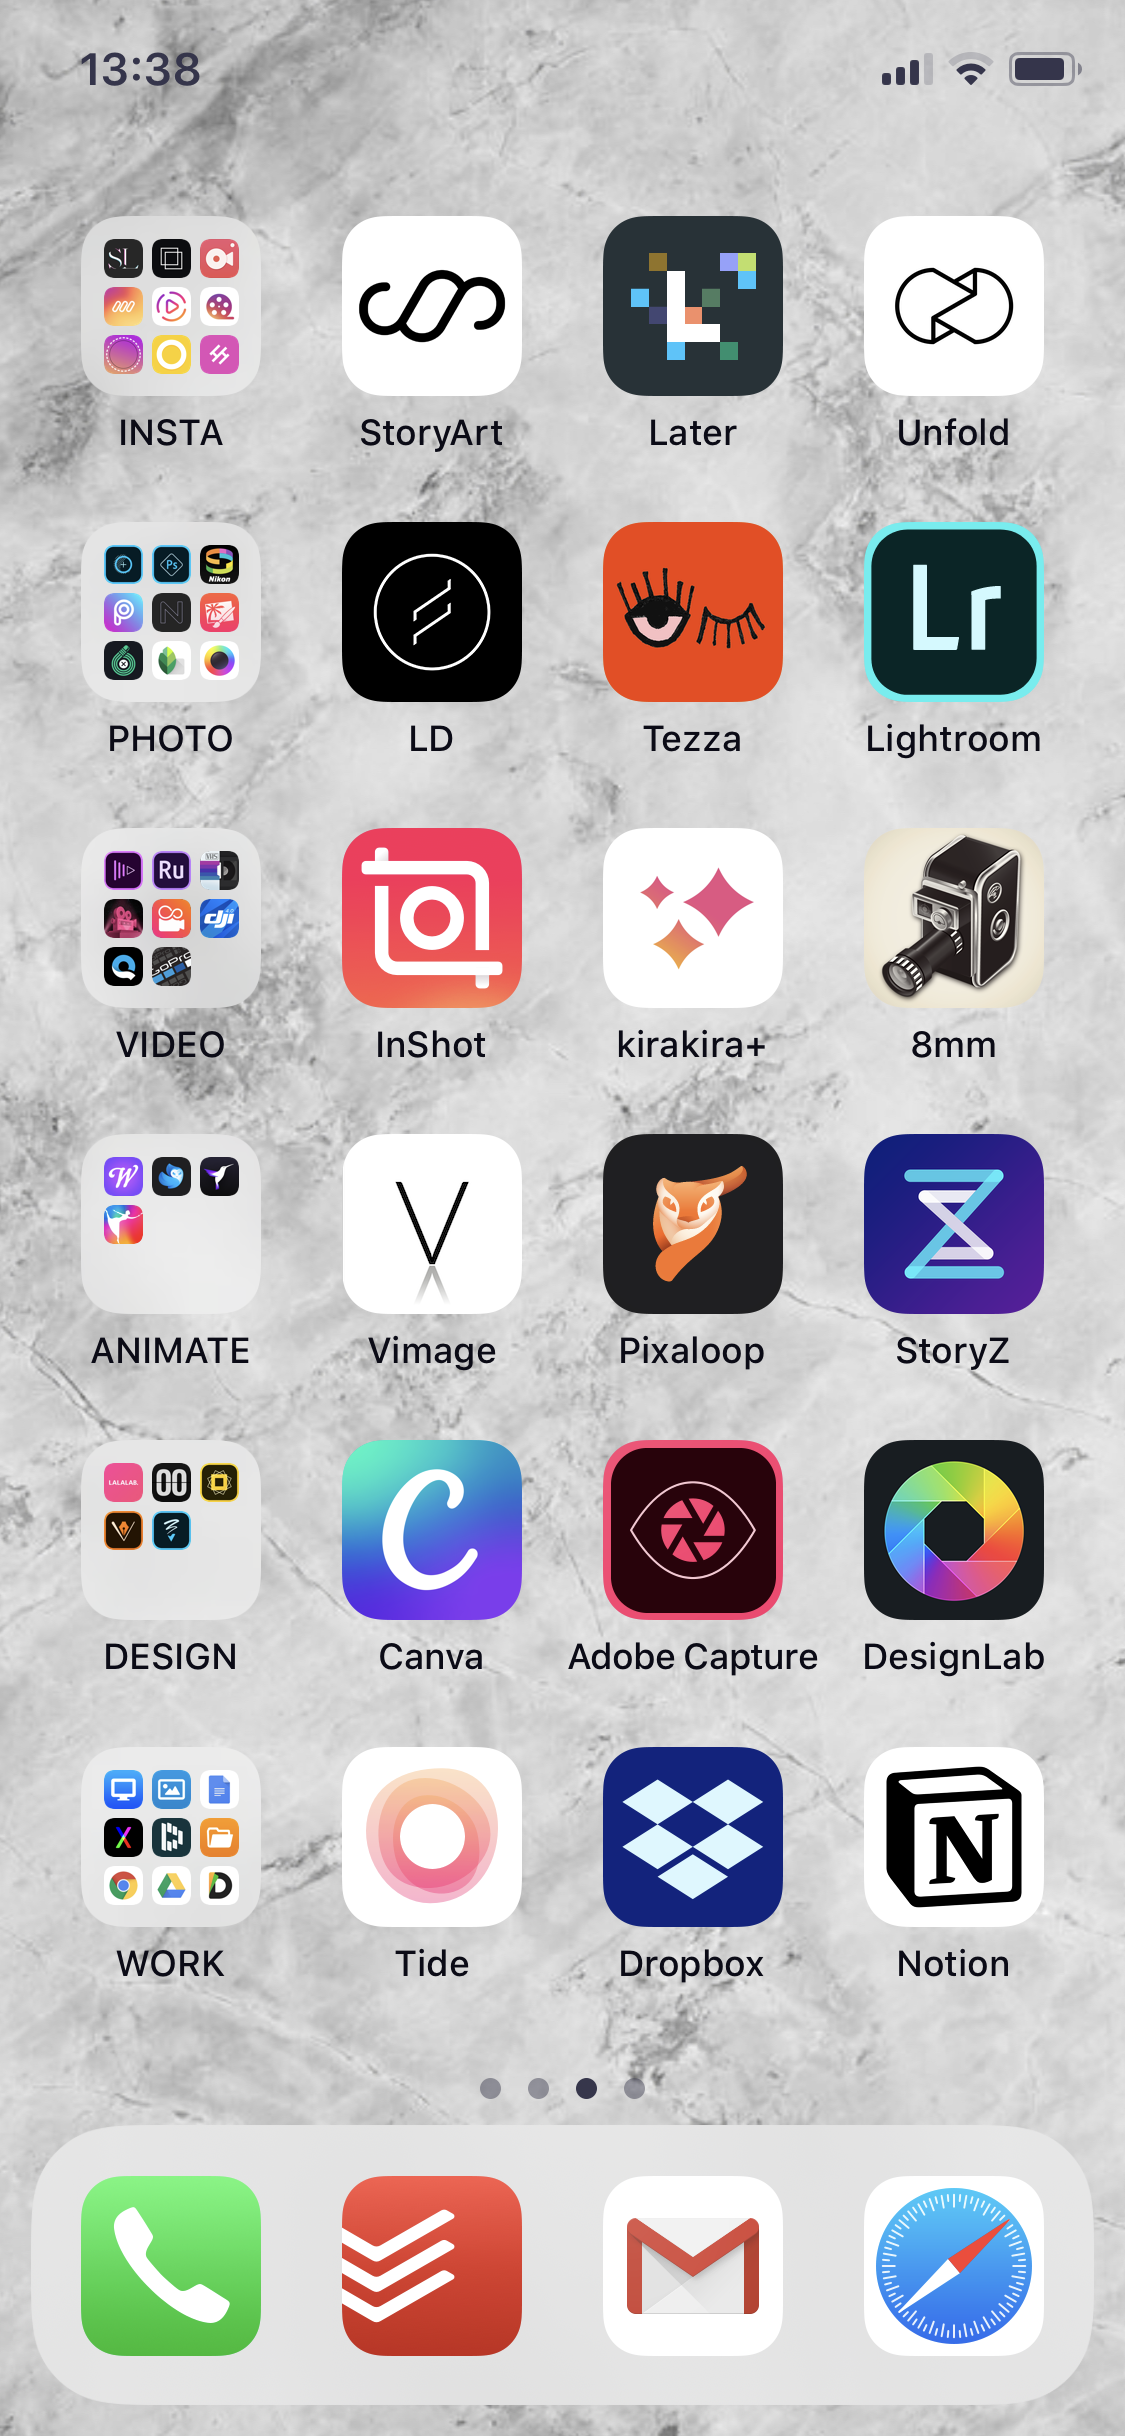 How to Organize iPhone Apps Aesthetically